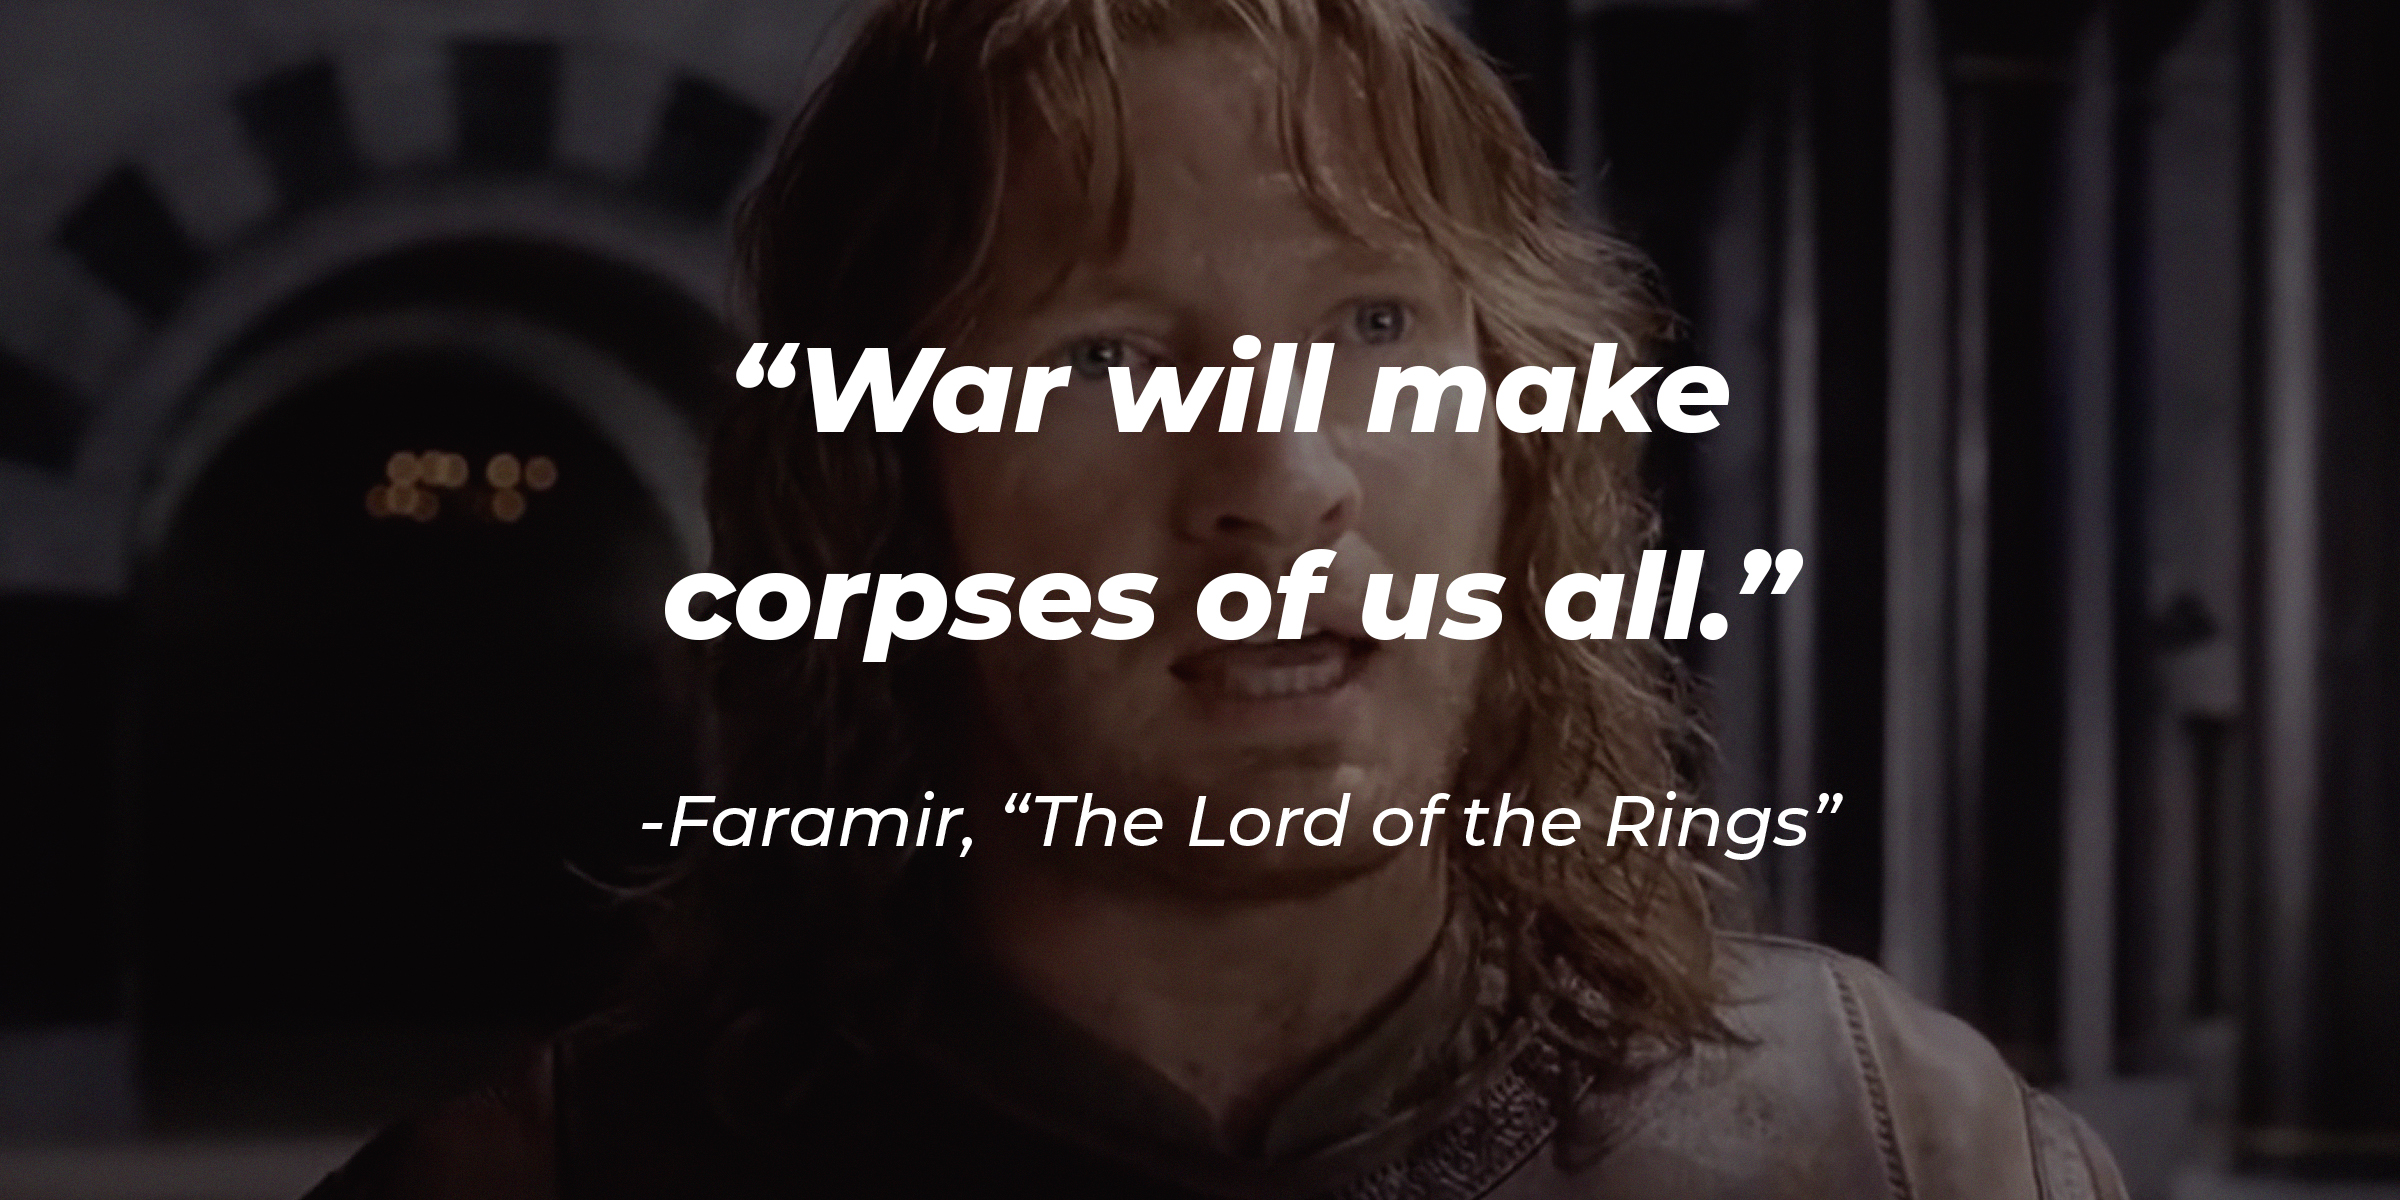 Faramir's image with the quote from "The Lord of the Rings": "War will make corpses of us all." | Source: facebook.com/lordoftheringstrilogy